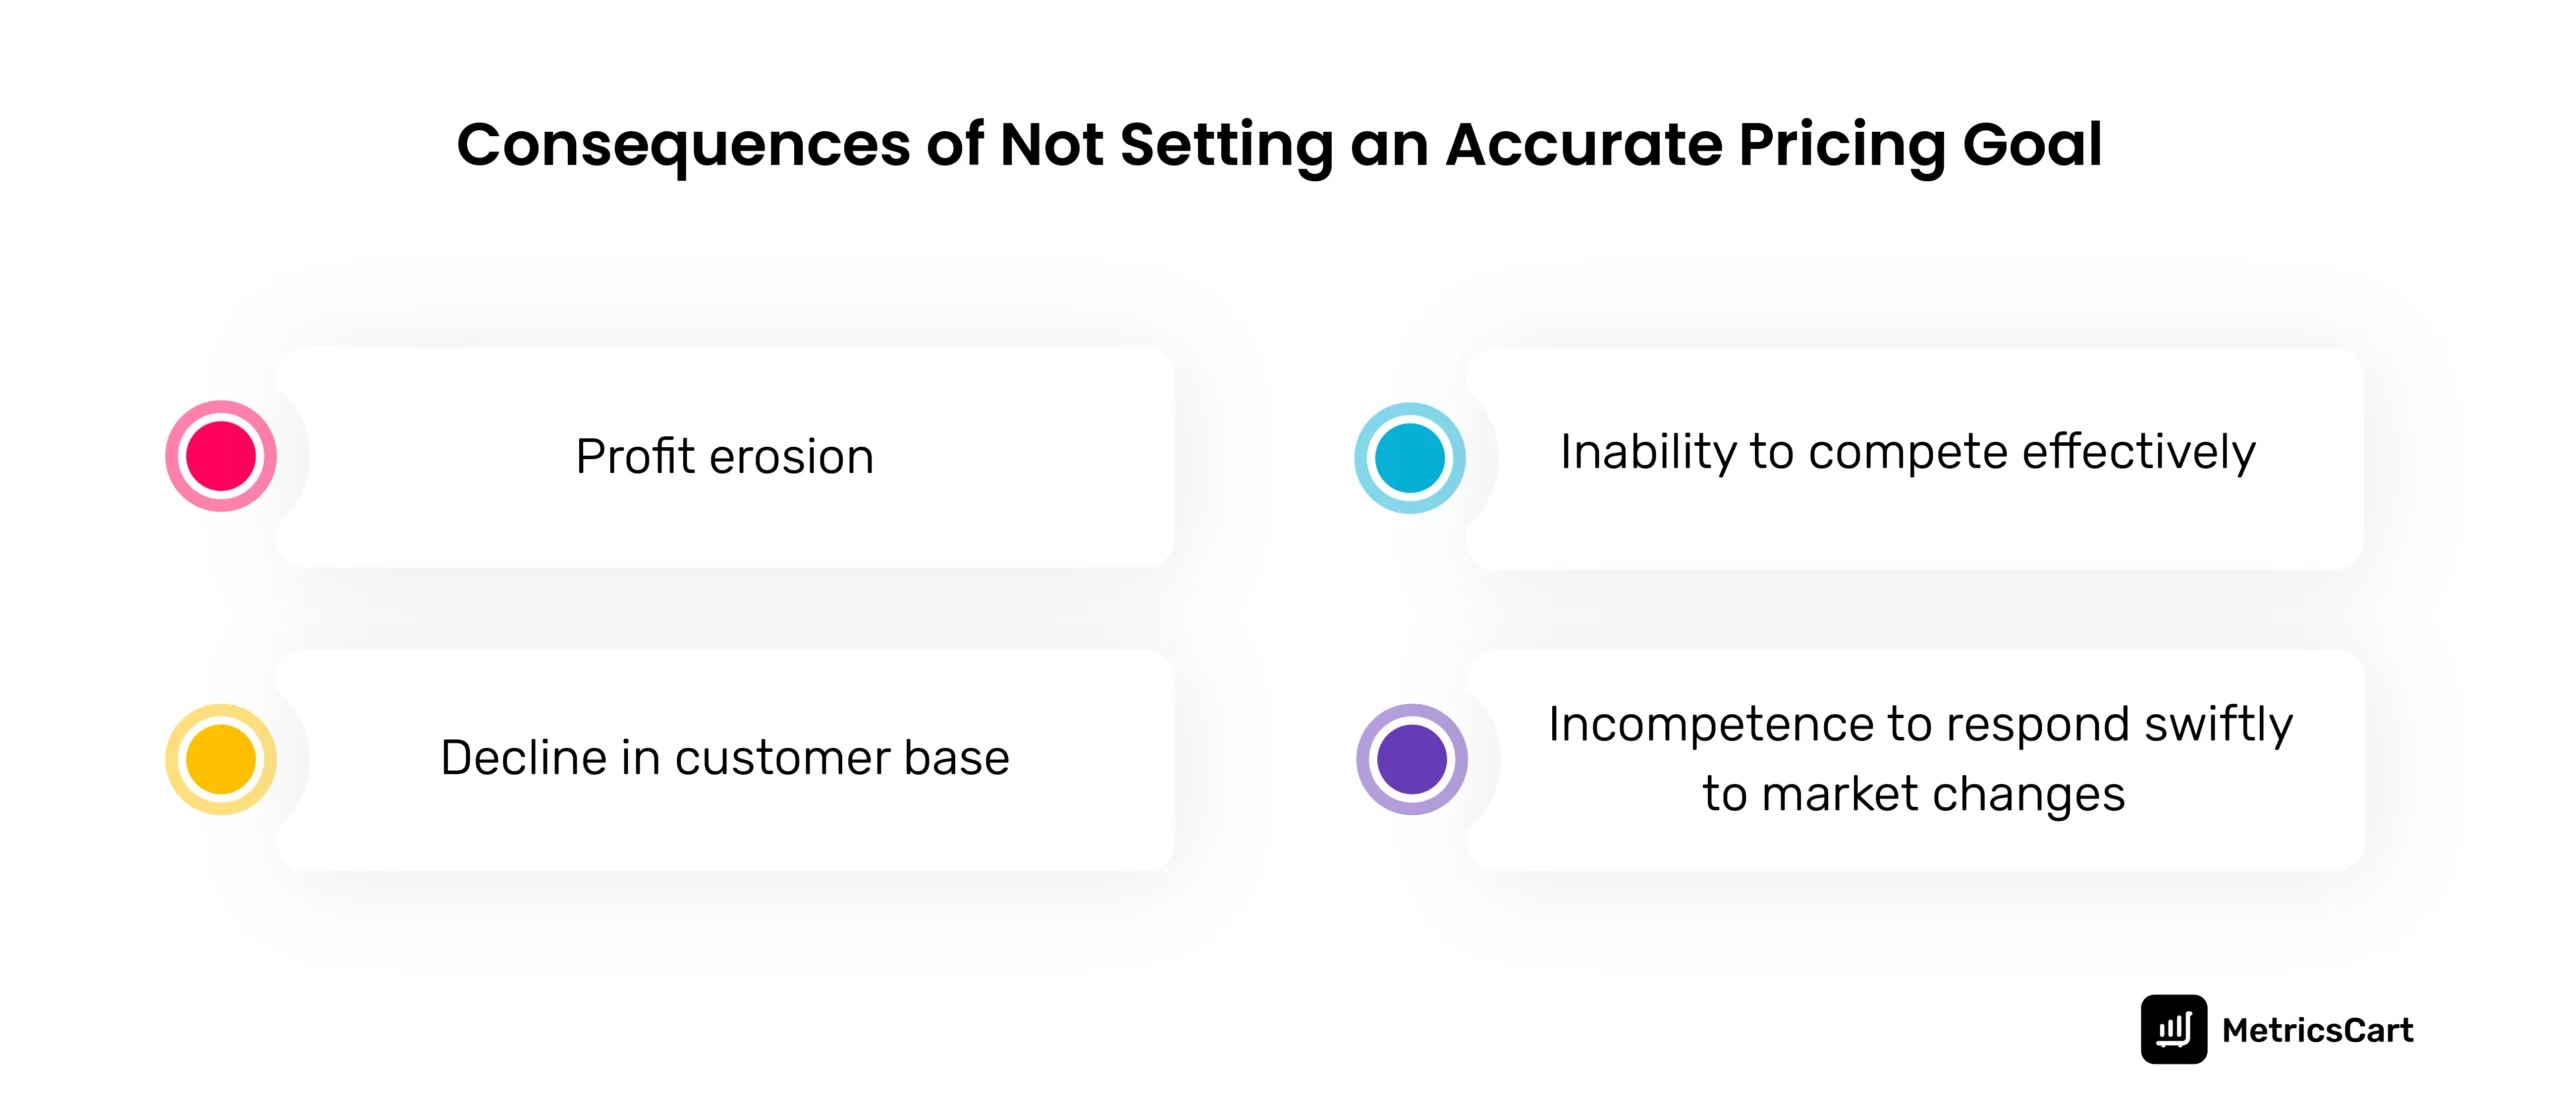 The image shows the Consequence of Inaccurate Pricing goals